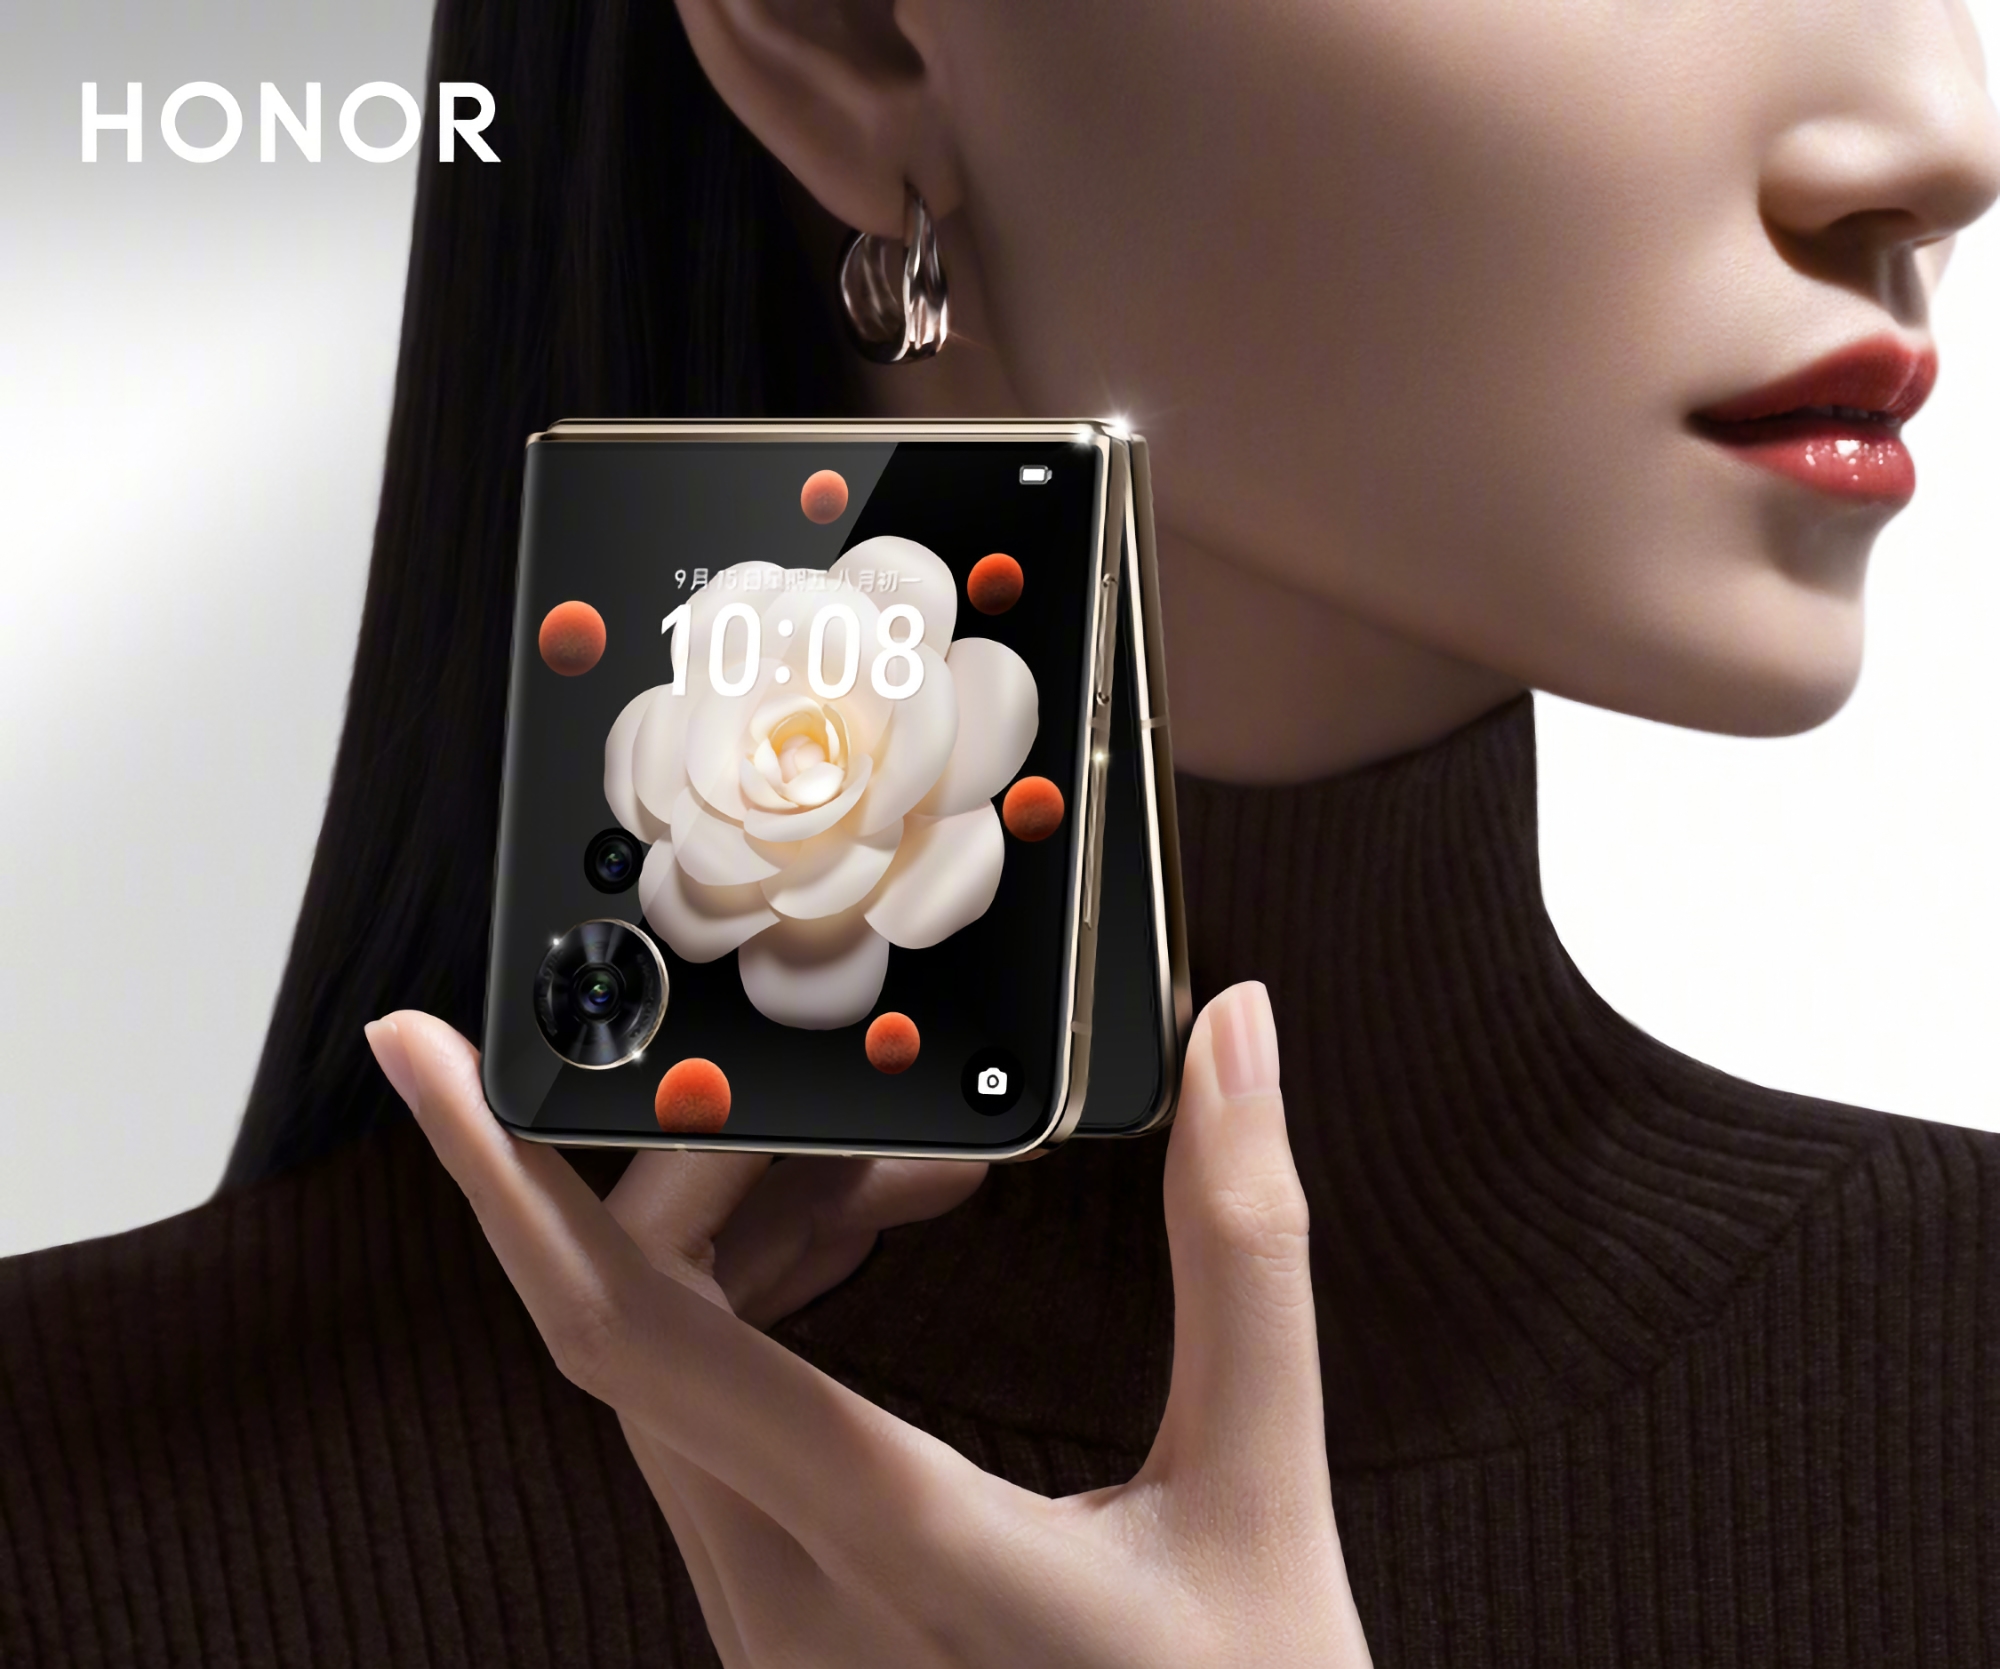 Honor has announced the launch date for the Magic V Flip